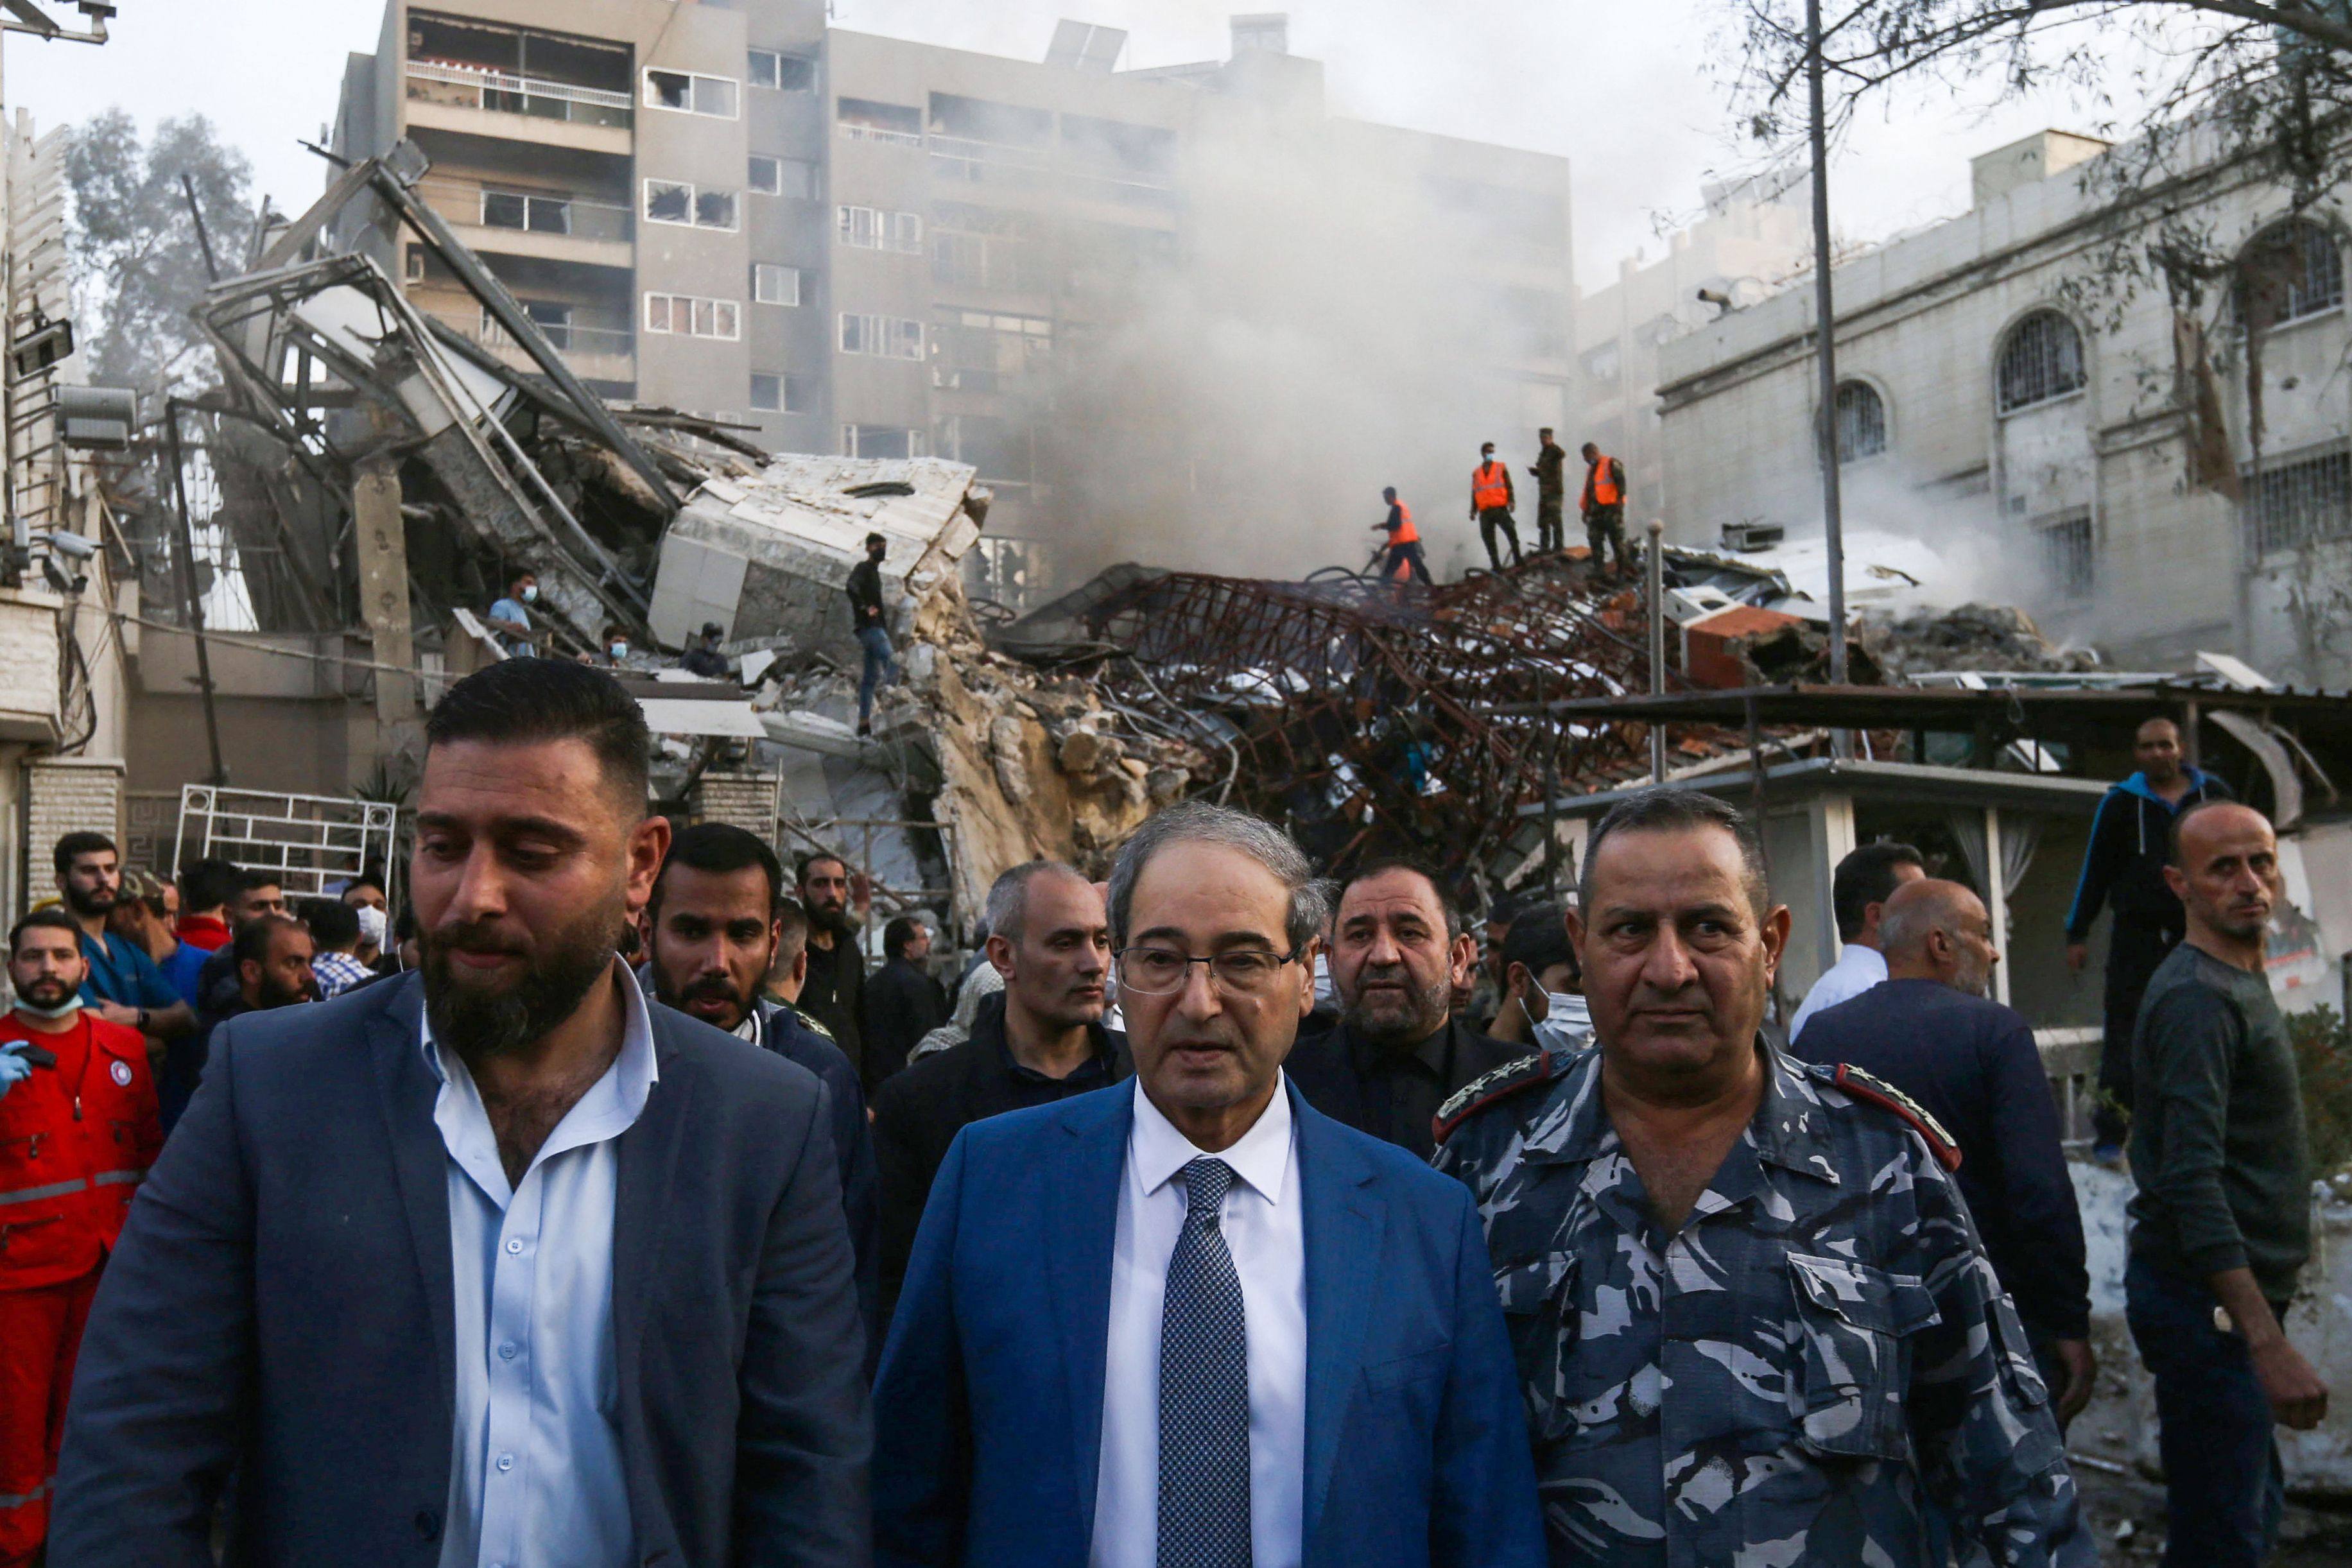 Syrian Foreign Minister Faisal Miqdad, pictured at the site of the attack, which he described as “henious”. Photo: AFP